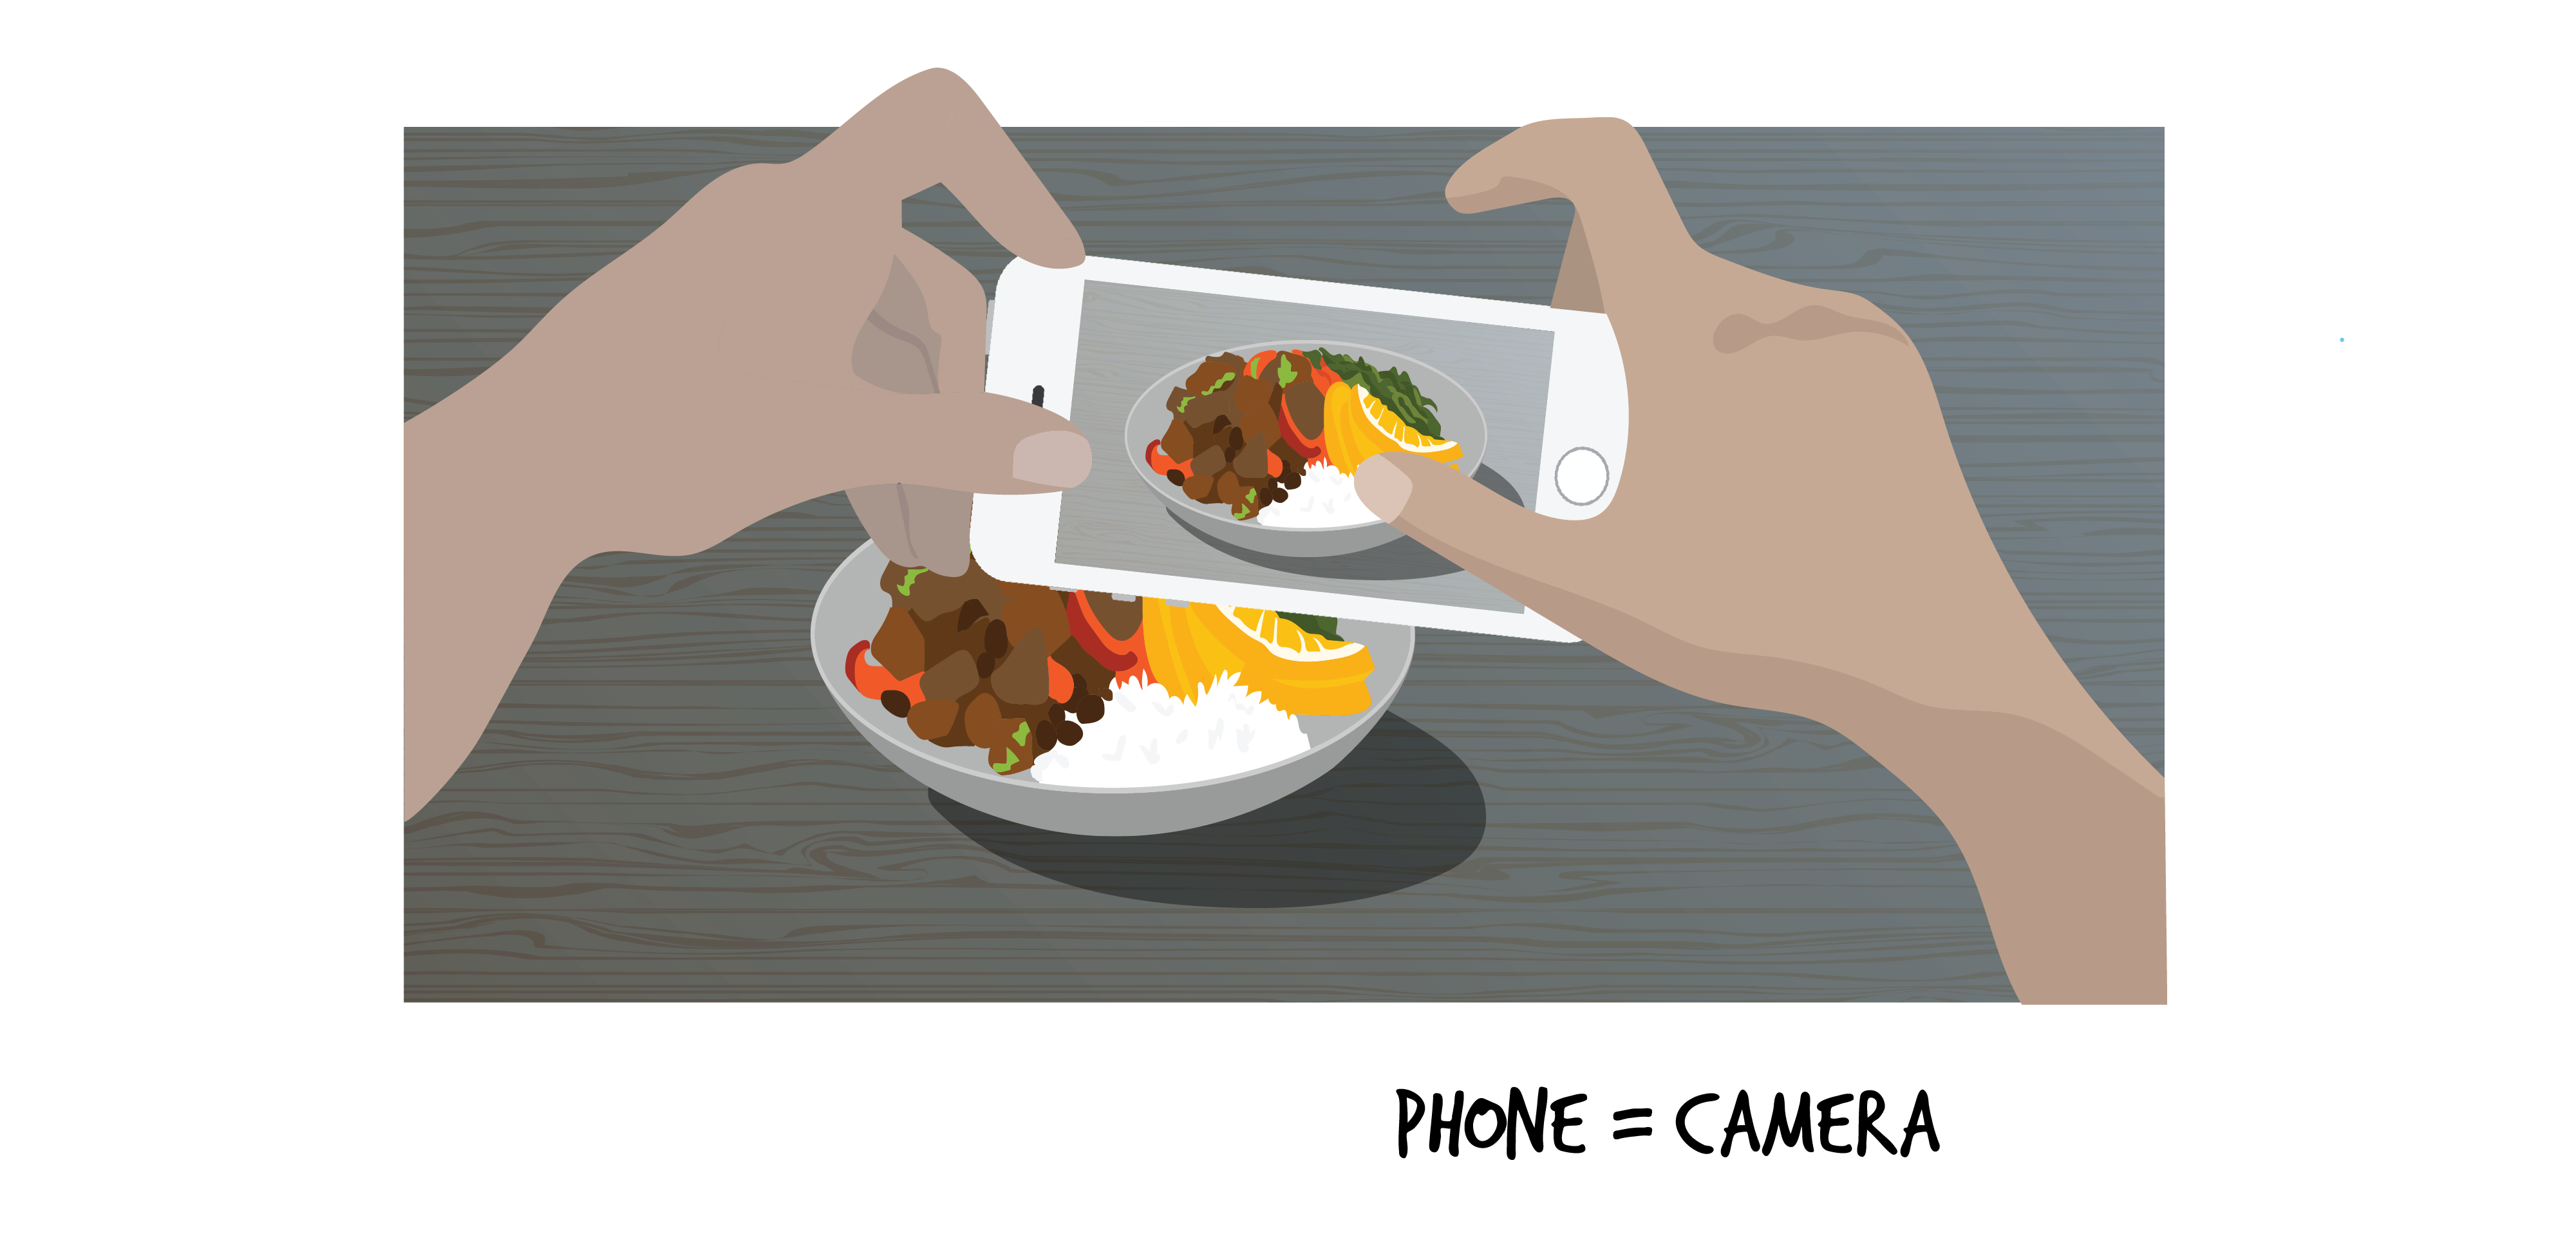 A grey bowl with a rice dish inside sits on a table. A person is taking a photo of the food with a white smart phone.